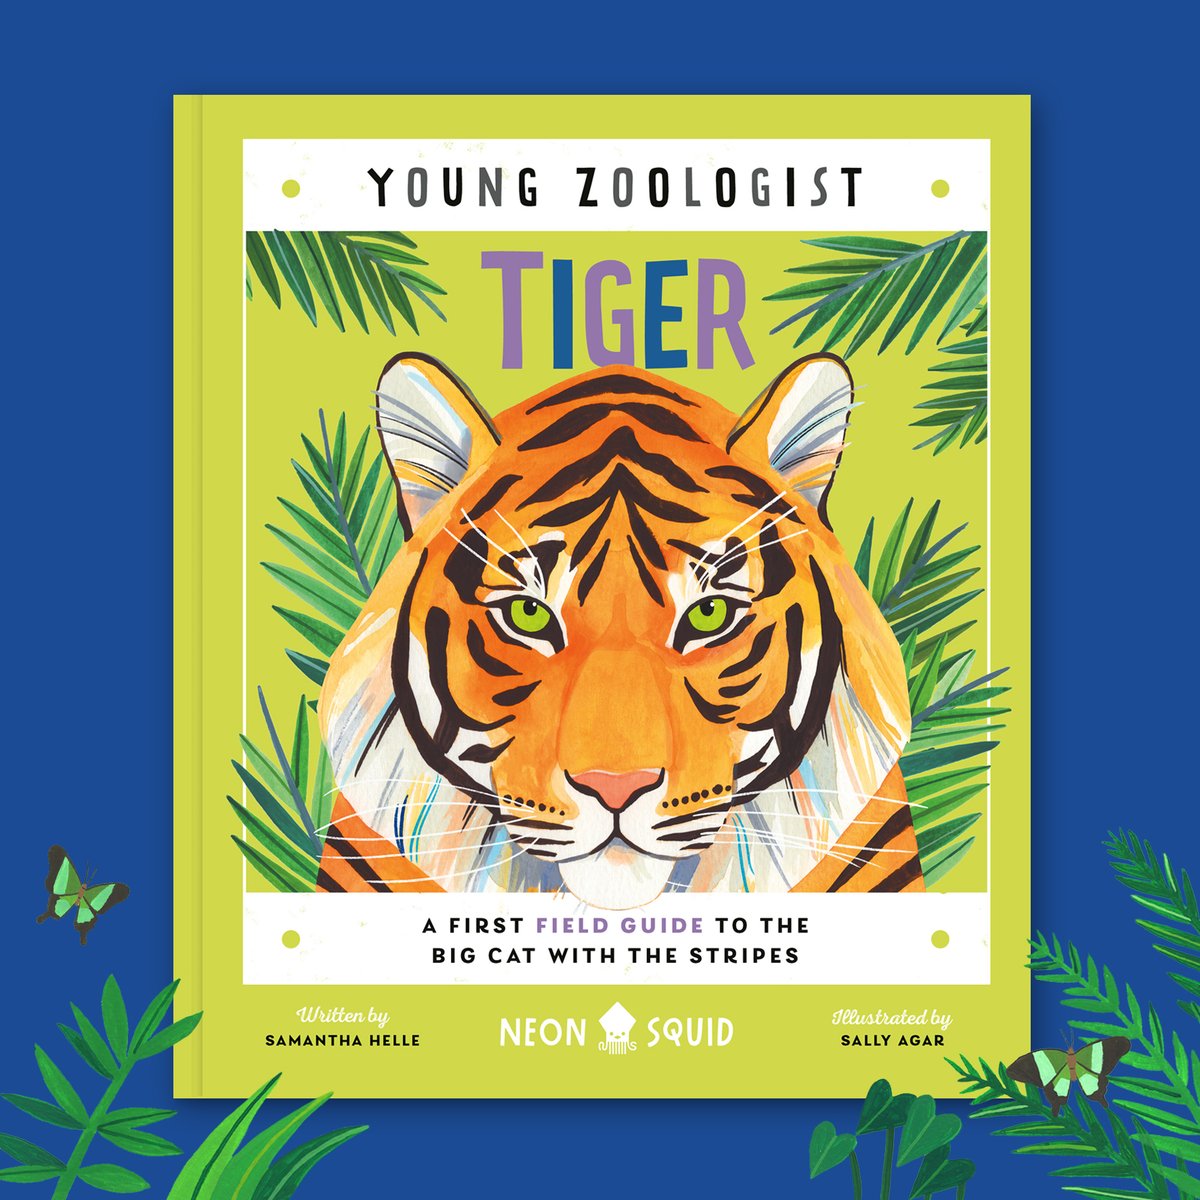 The first tigers started evolving more than TWO MILLION years ago! 🐯🐅 There are six living subspecies today, and Sumatran tigers are the only remaining island species of tiger in the world. Kids will learn about these big cats in Tiger (Young Zoologist) by @samanthaiam